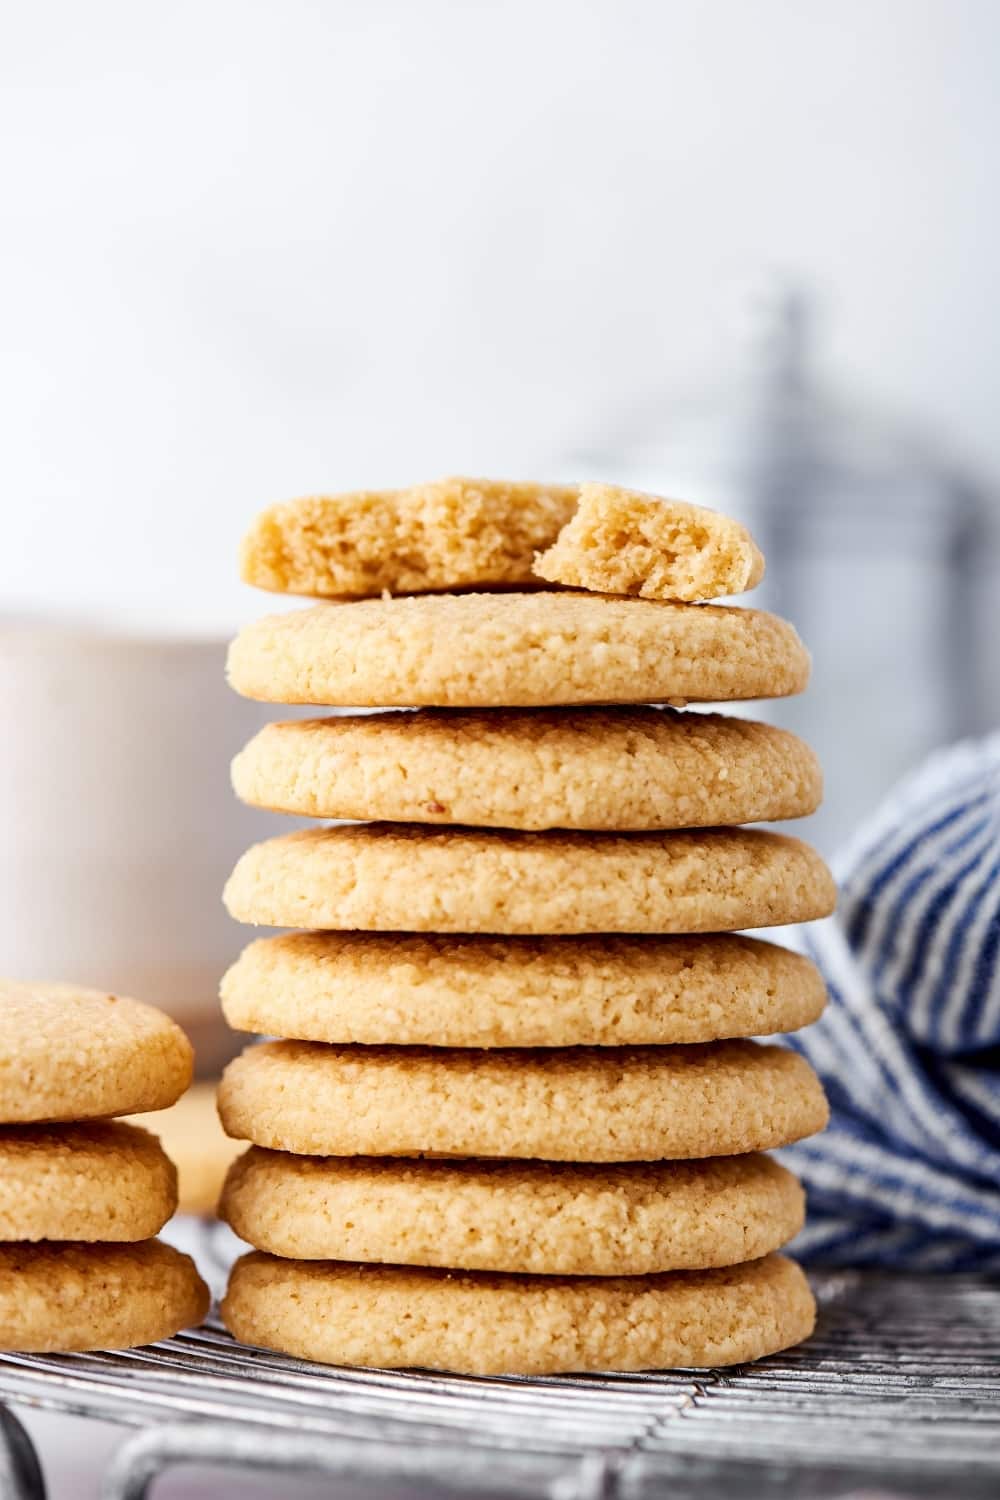 Hey stack of seven shortbread cookies on a wire rack. On the top cookie is a half of a shortbread cookie.